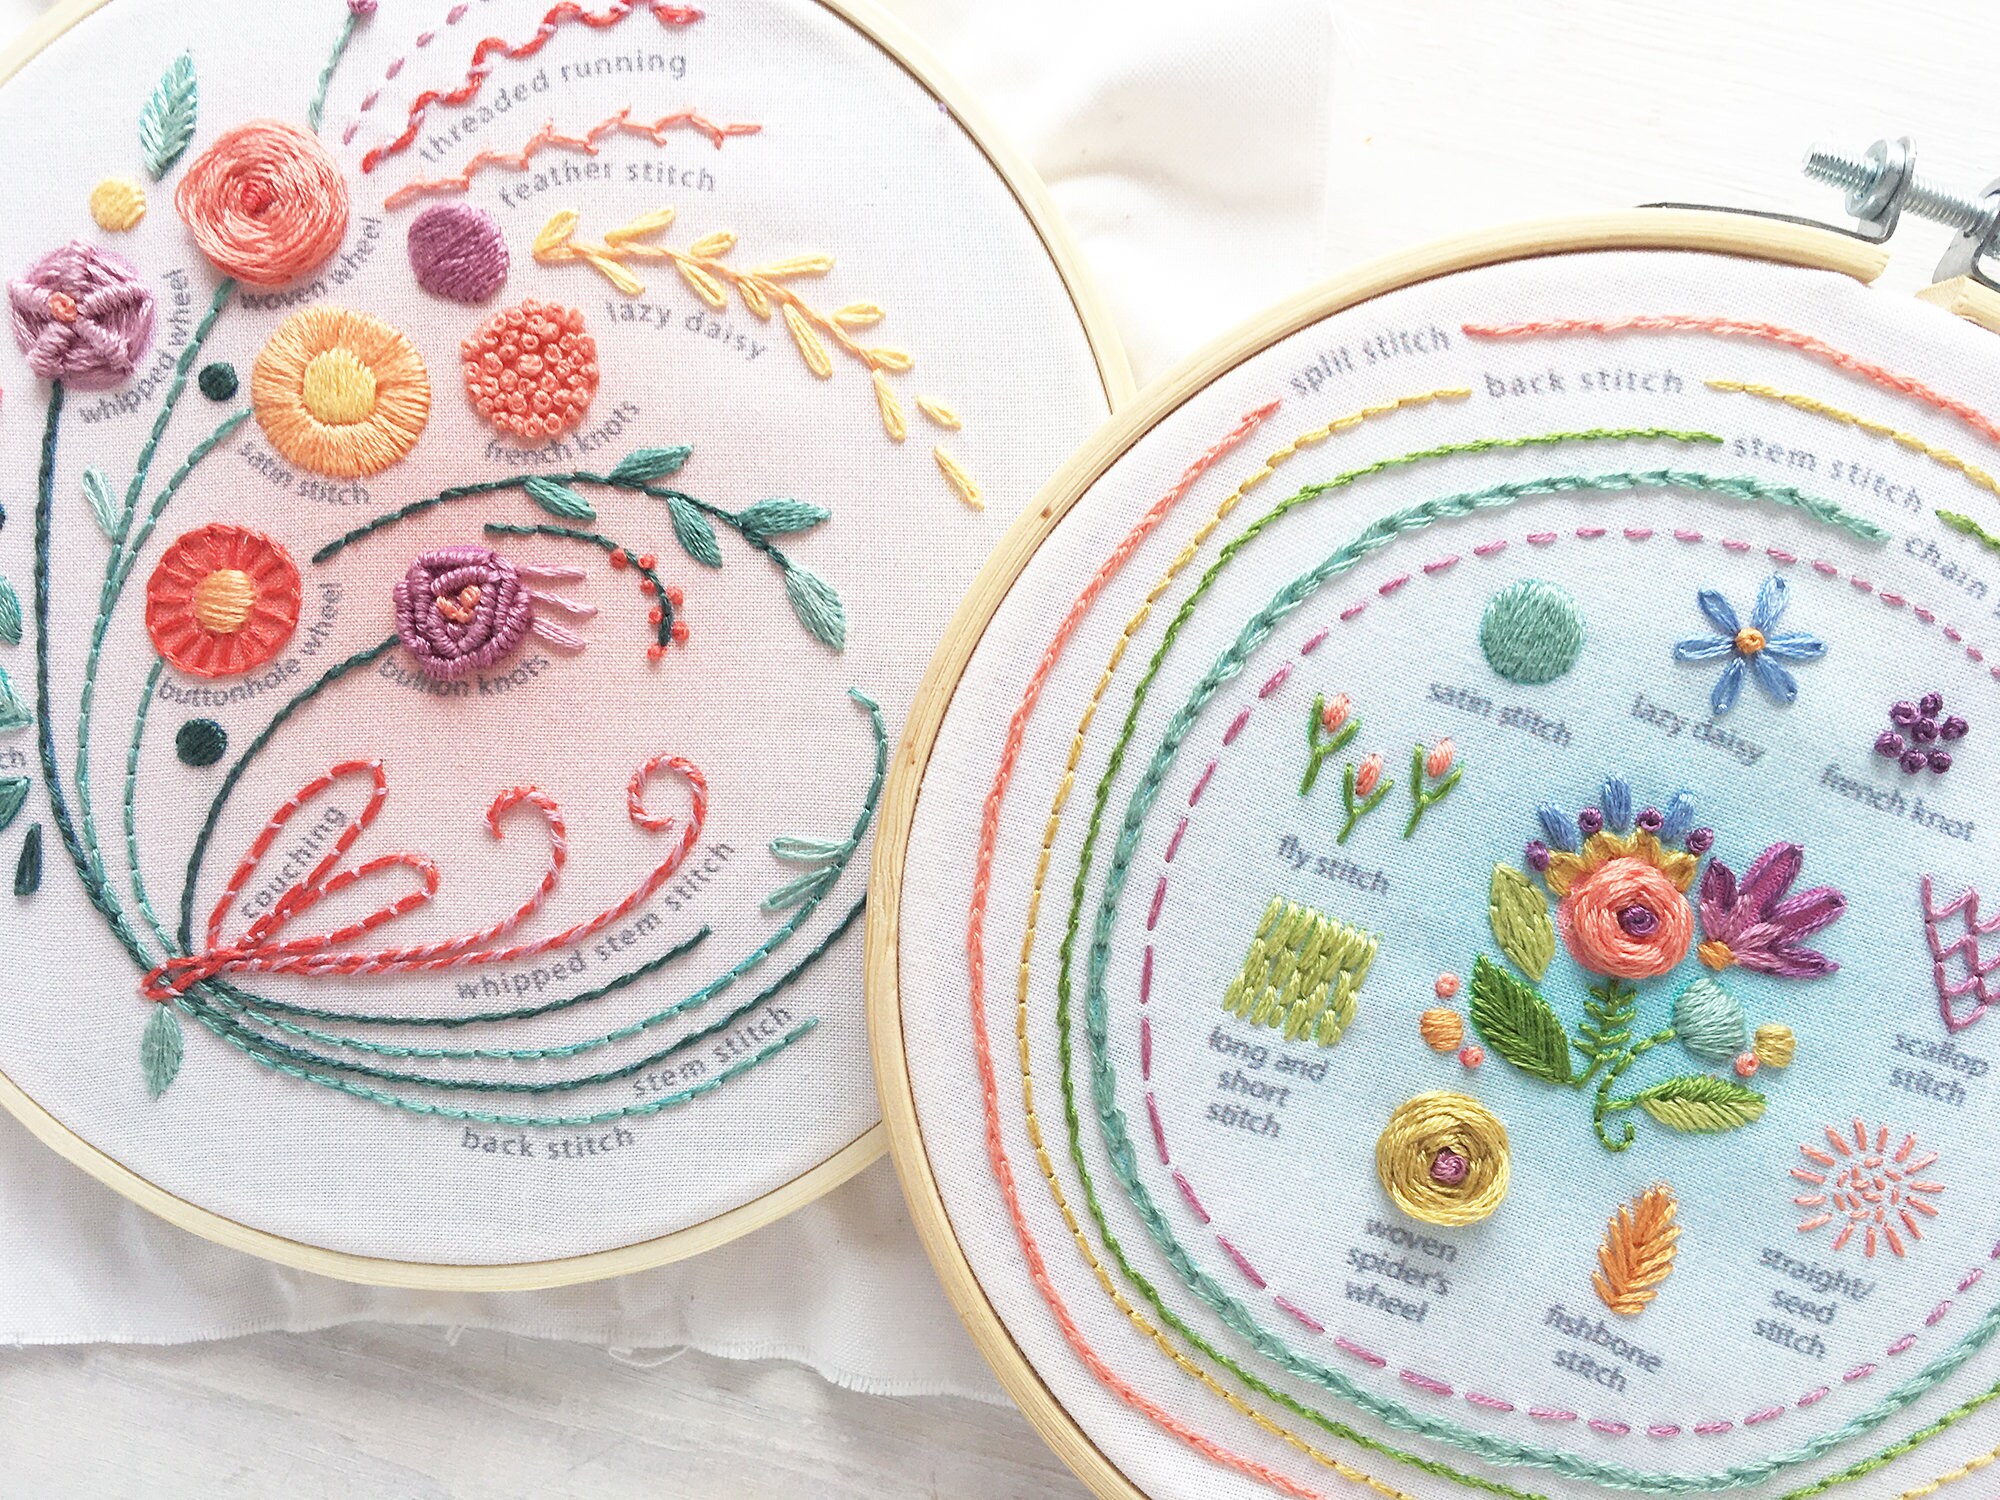 Hand Embroidery Hoop Art with Free Pattern ❤️ Embroidery by Gossamer/  Rosette Stitch 🌸 